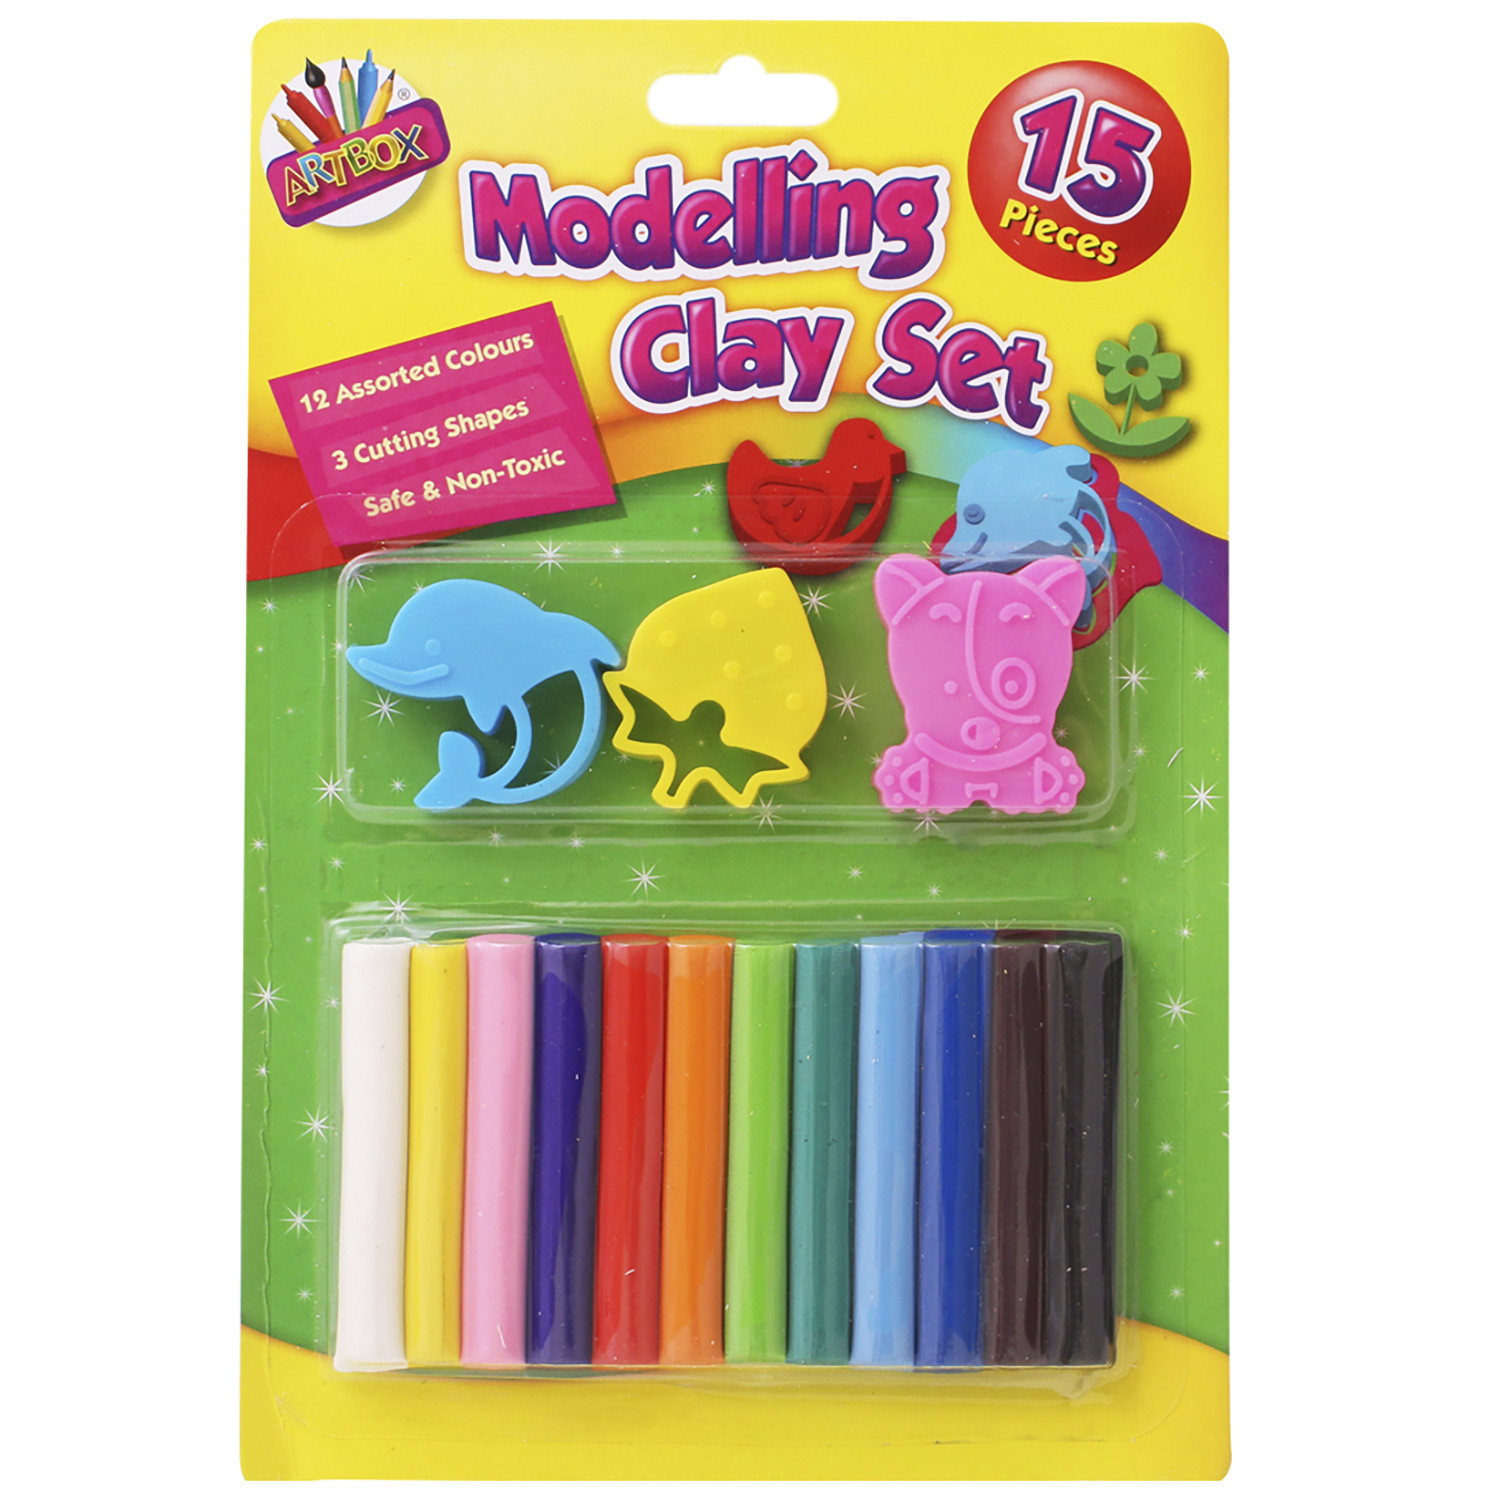 15 Piece Modelling Clay Set Image 1